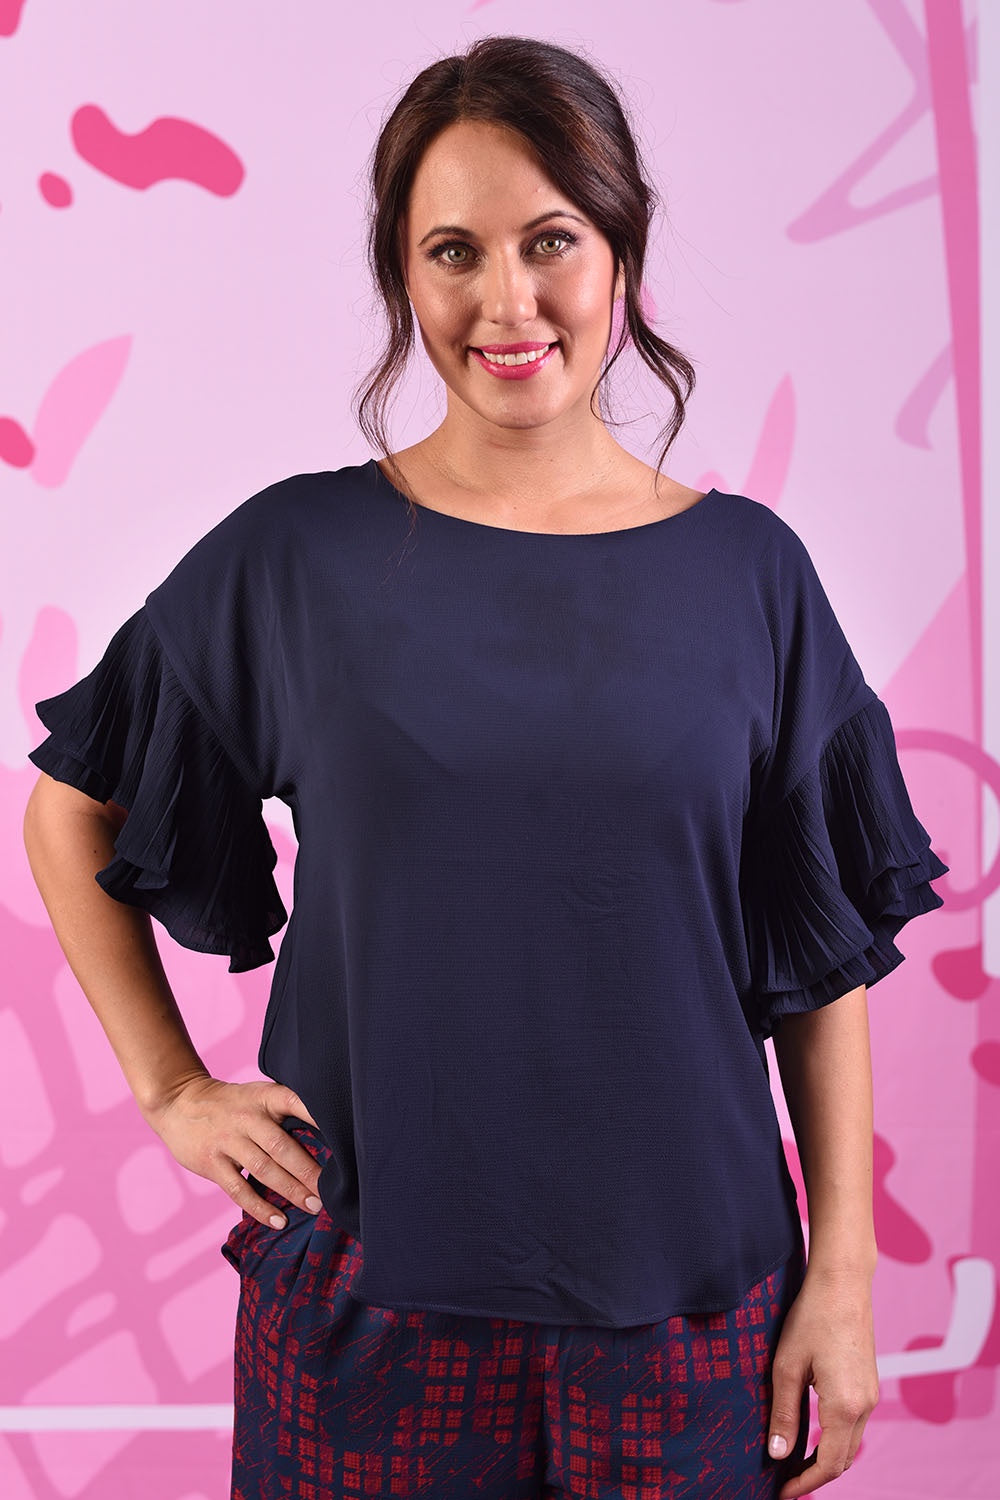 Another model wearing the Dayna Top in plain navy